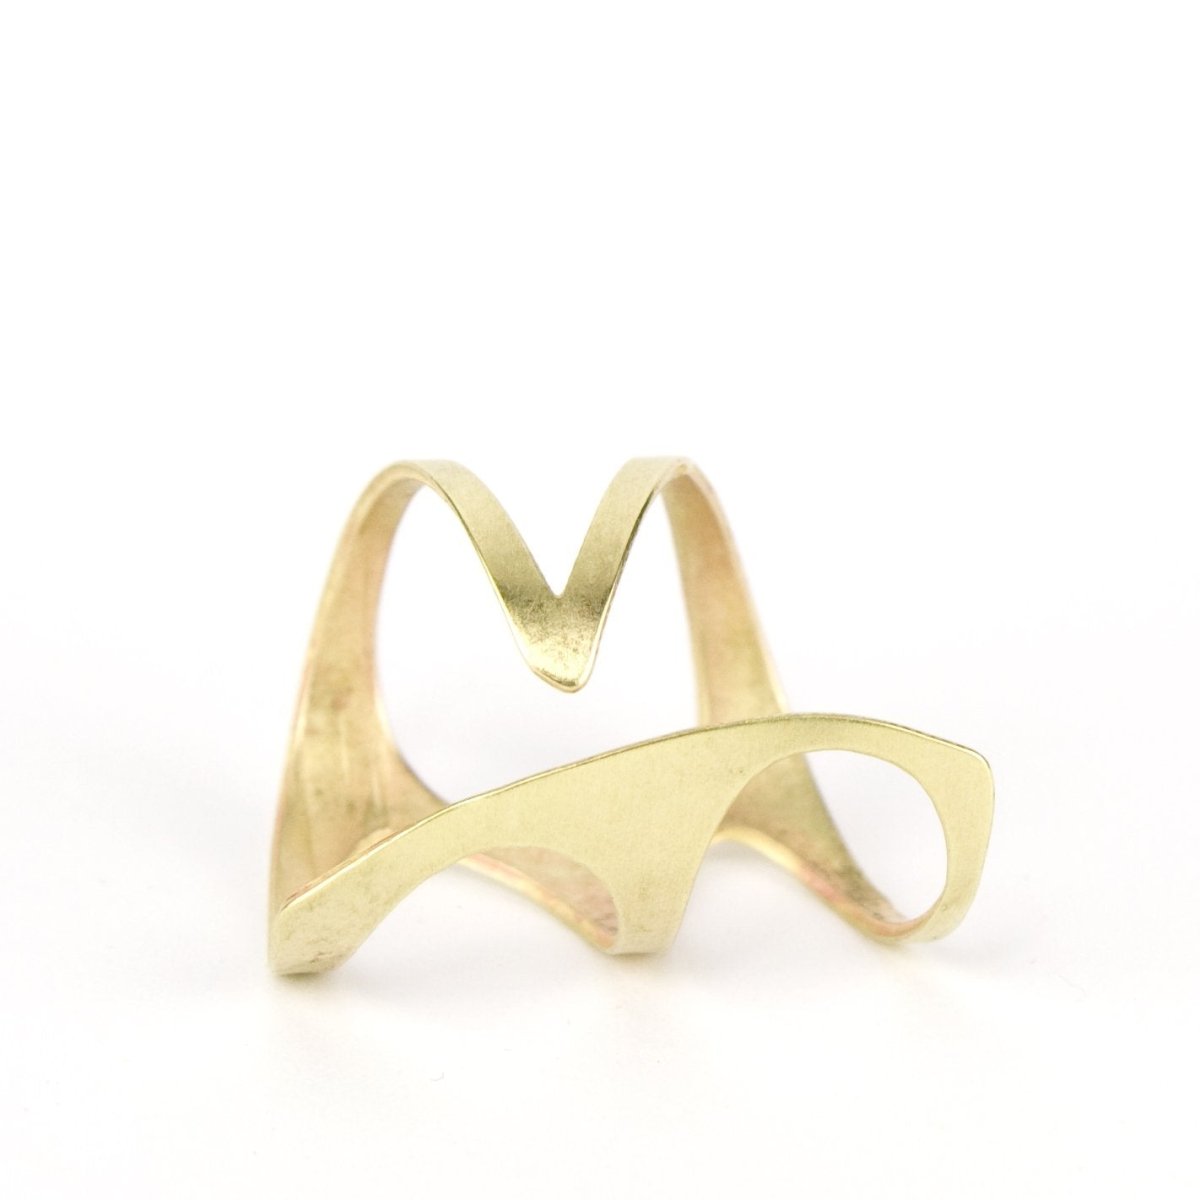 Side view of the Organic Triangle gold ring.